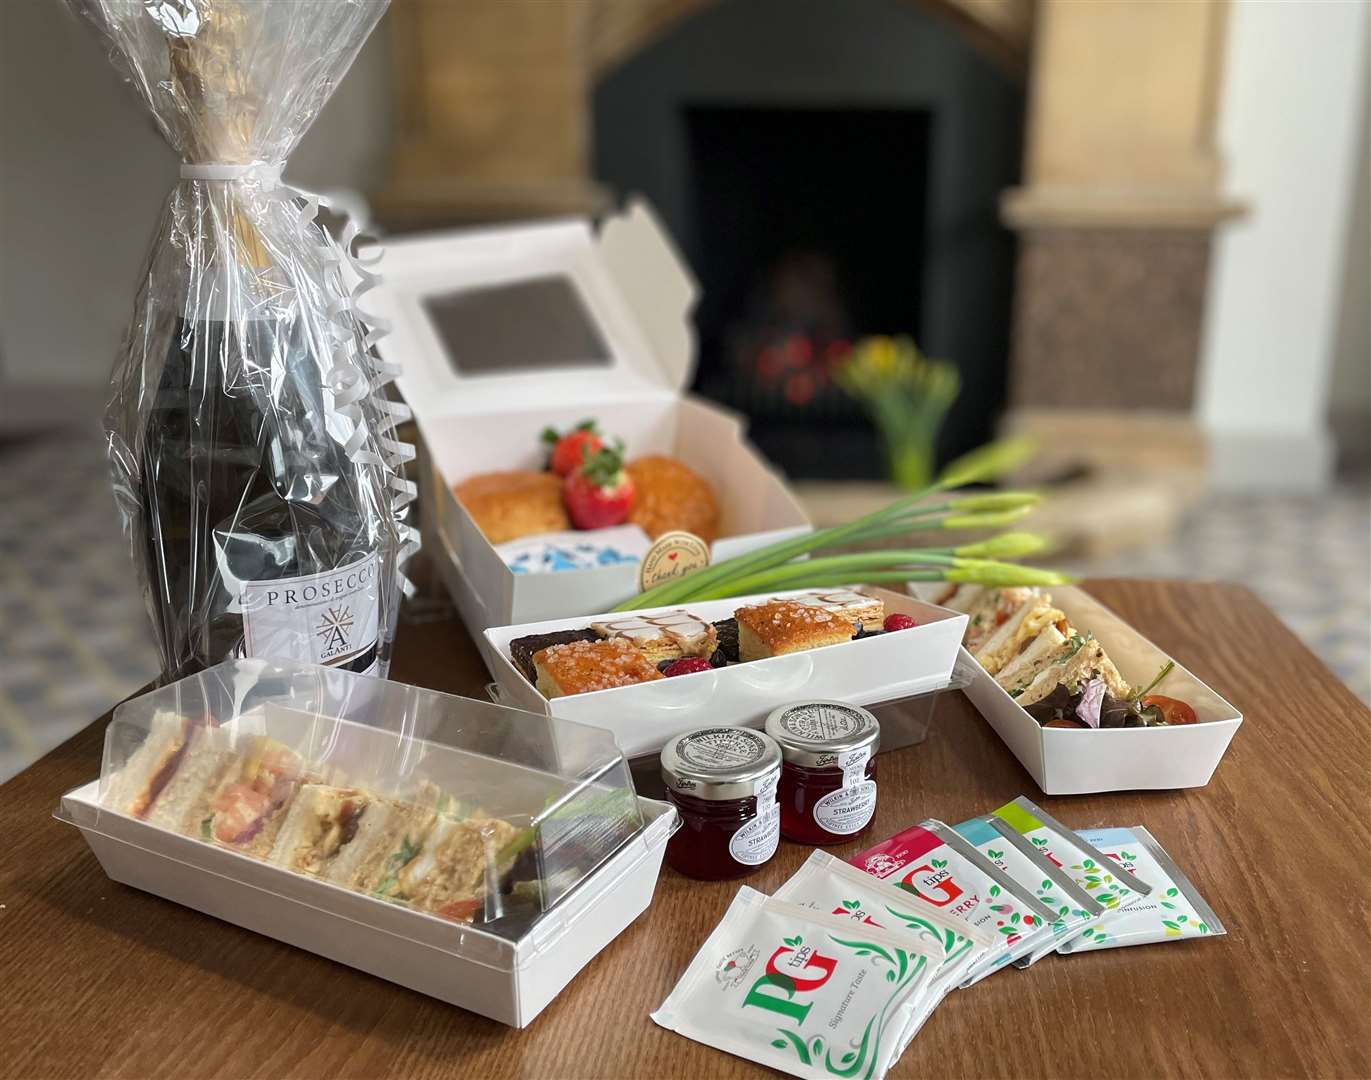 Takeaway Mother's Day afternoon tea from Bridgewood Manor Hotel